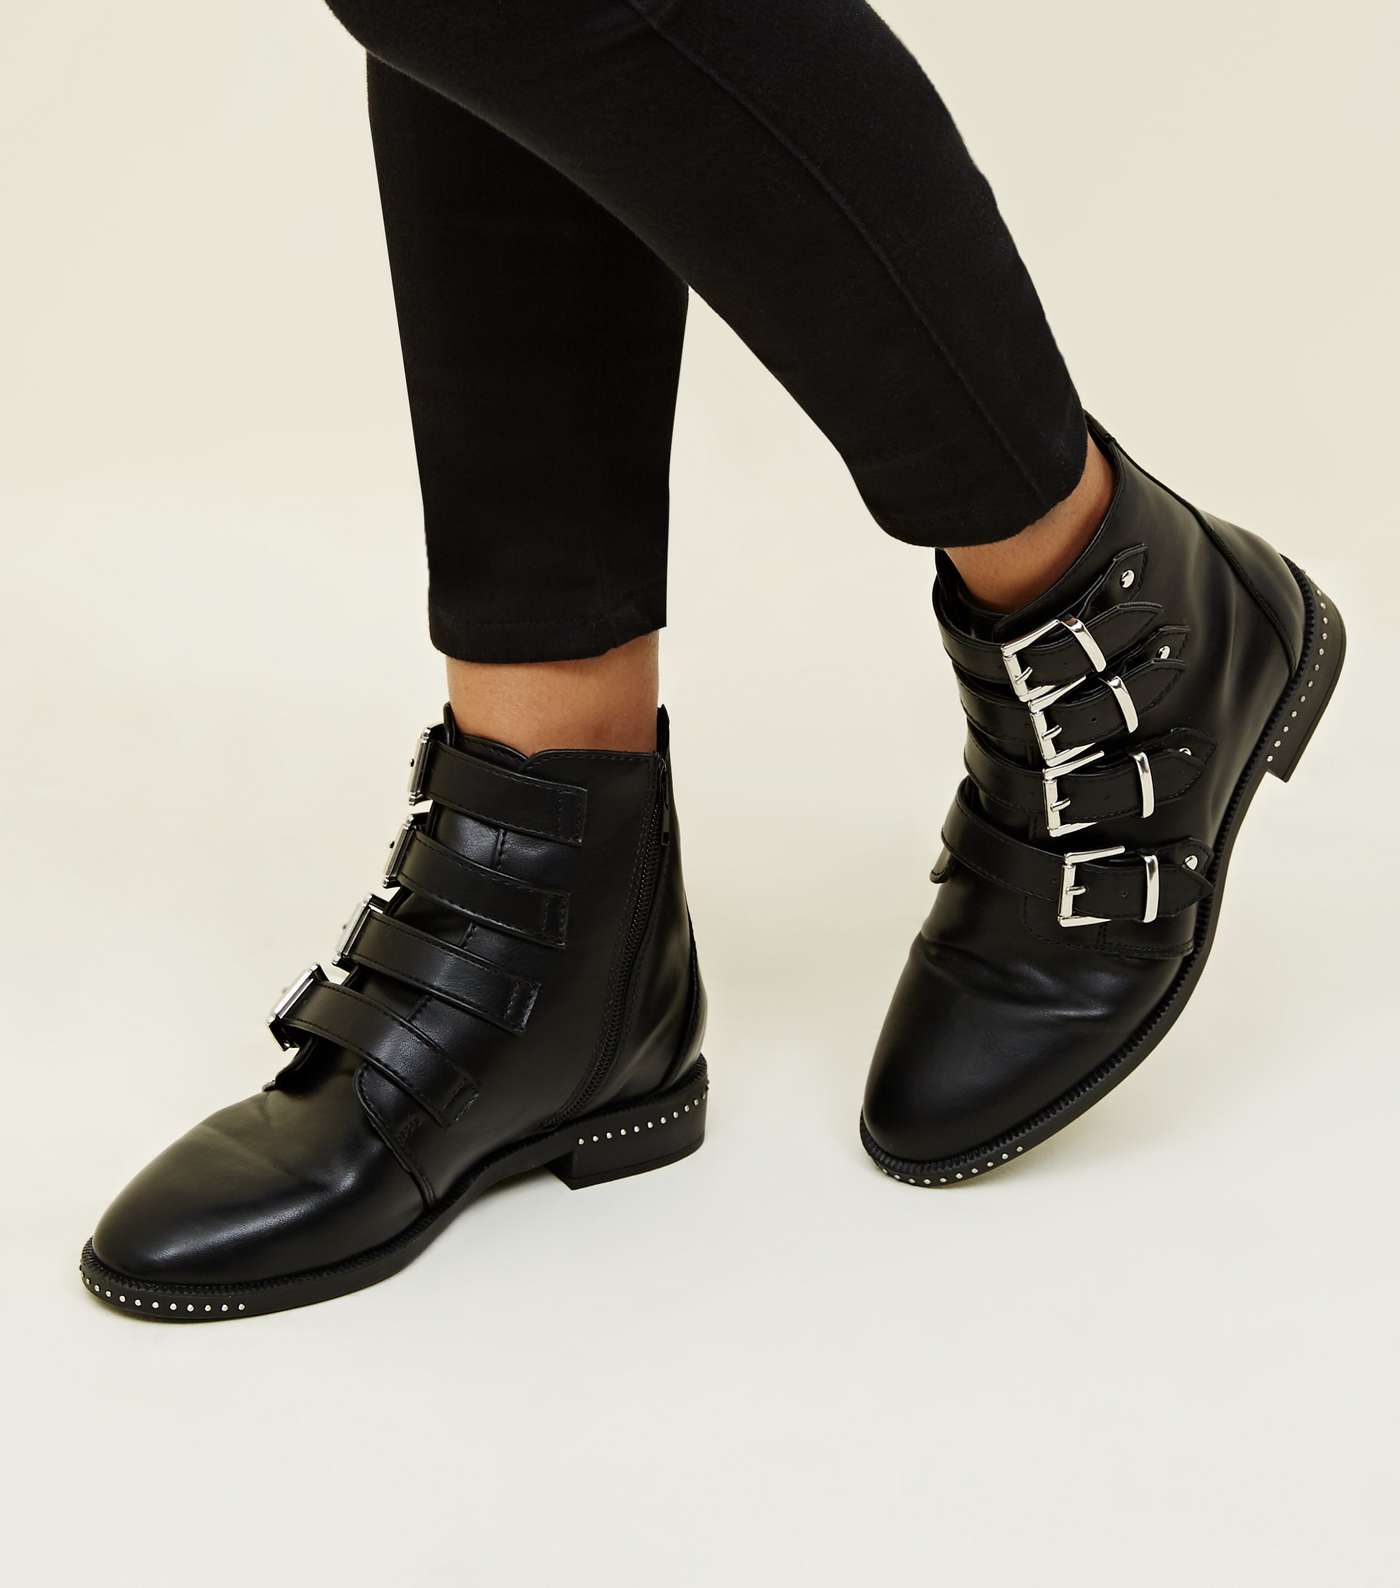 Girls Black Buckle Strap Studded Ankle Boots Image 2